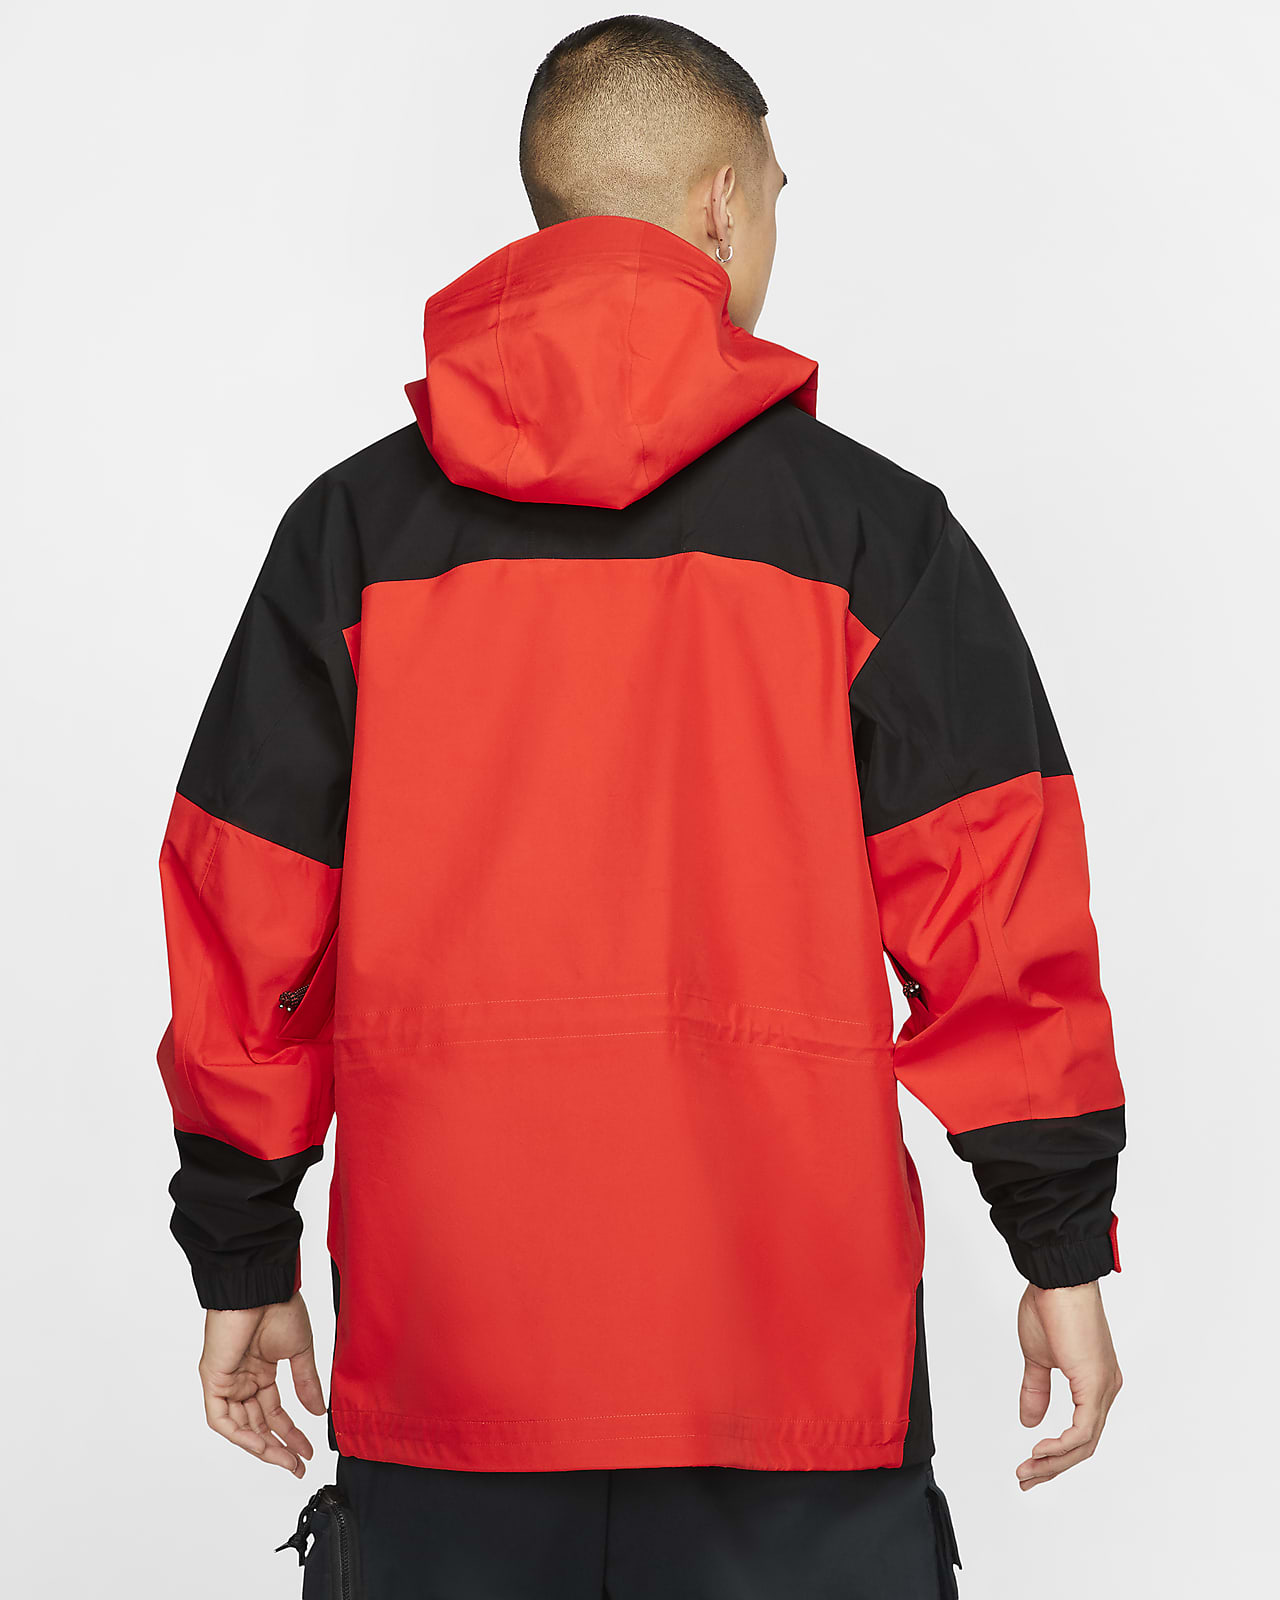 https://static.nike.com/a/images/t_PDP_1280_v1/f_auto,q_auto:eco/4eb293a9-894d-476d-8859-335d836fc573/acg-gore-tex-jacket-Rs3lhr.png